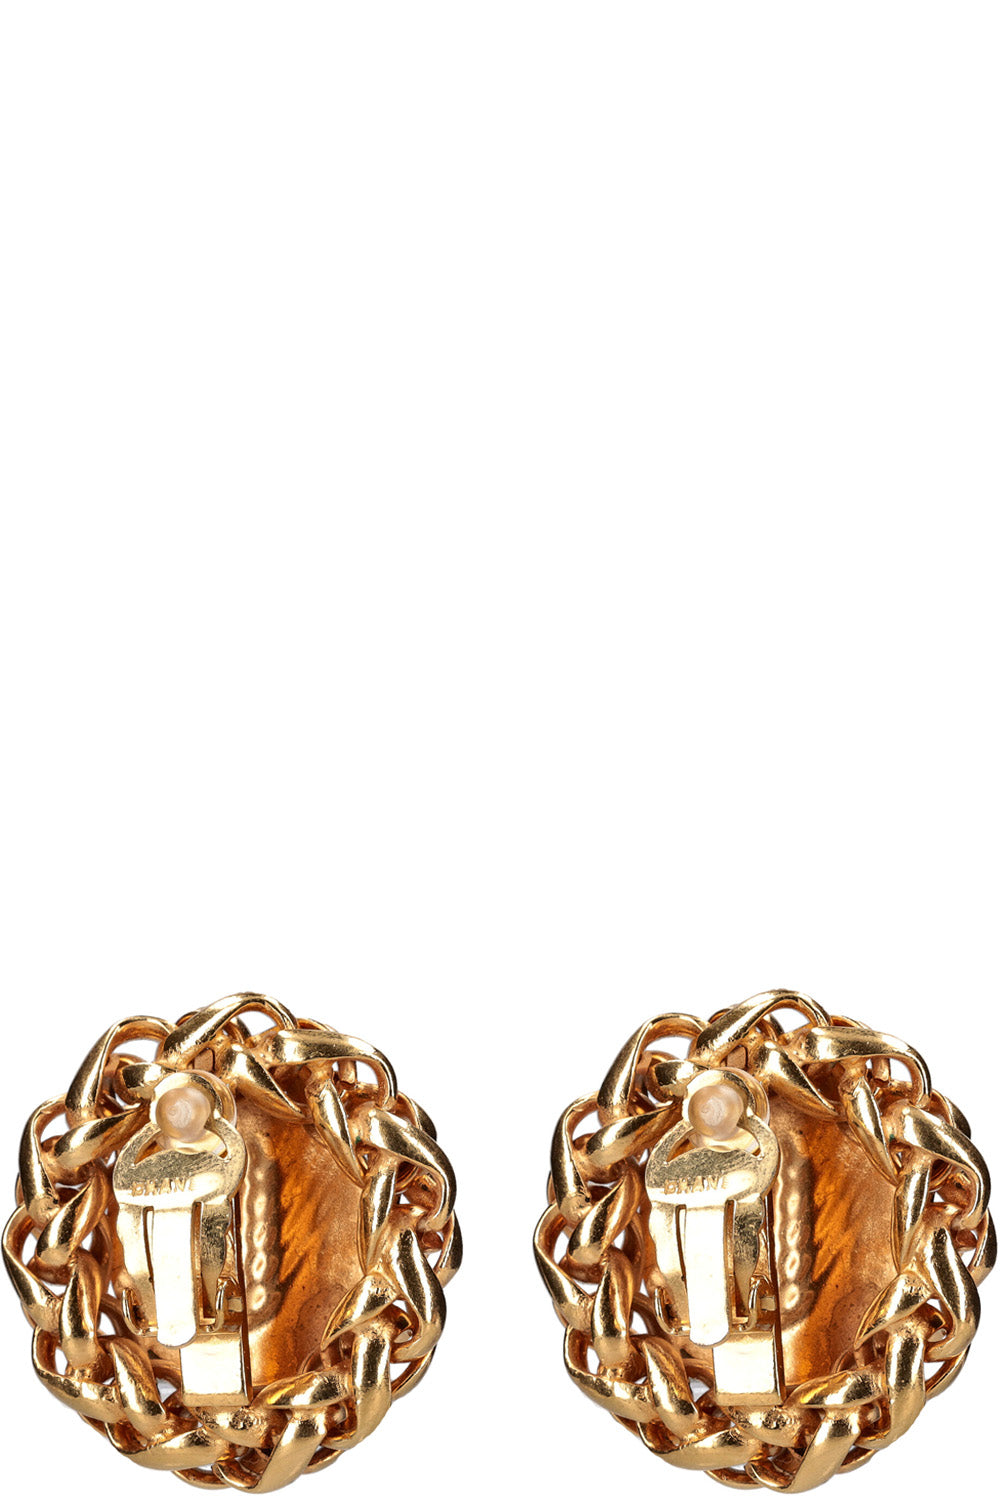 CHANEL Metal Chain Link Wheat Medaillon CC Earrings Gold Plated